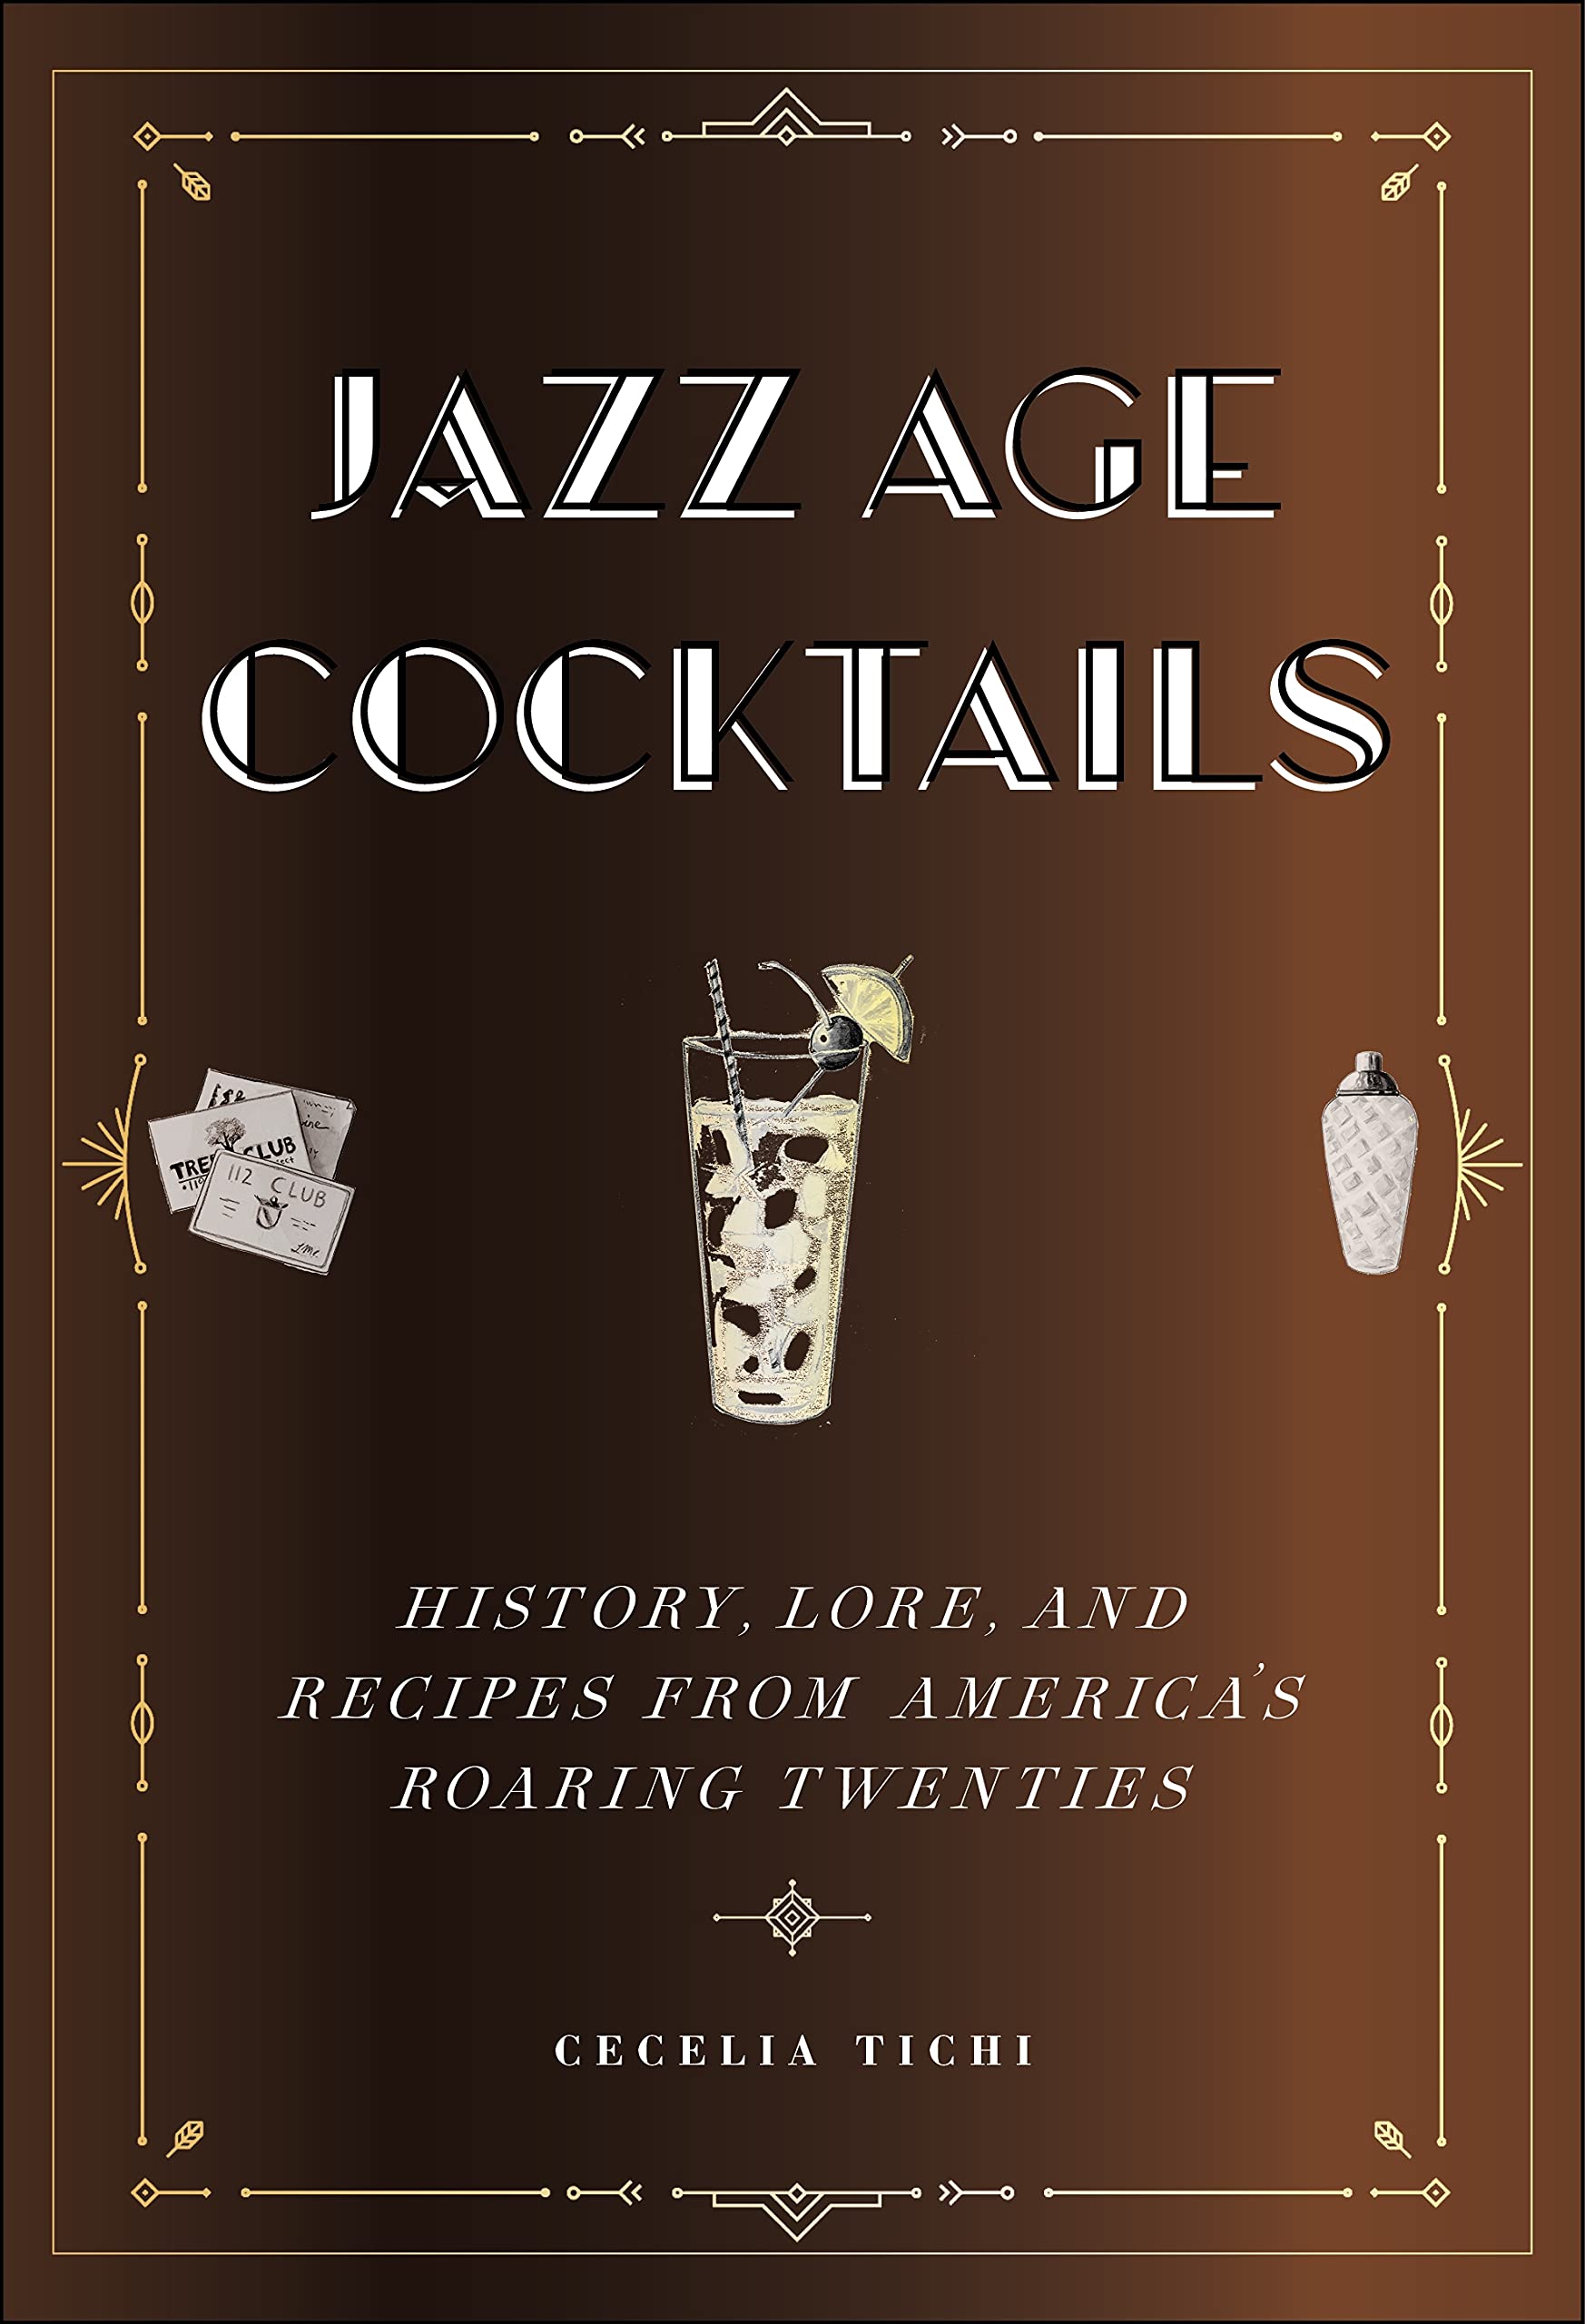 Jazz Age Cocktails: History, Lore, and Recipes